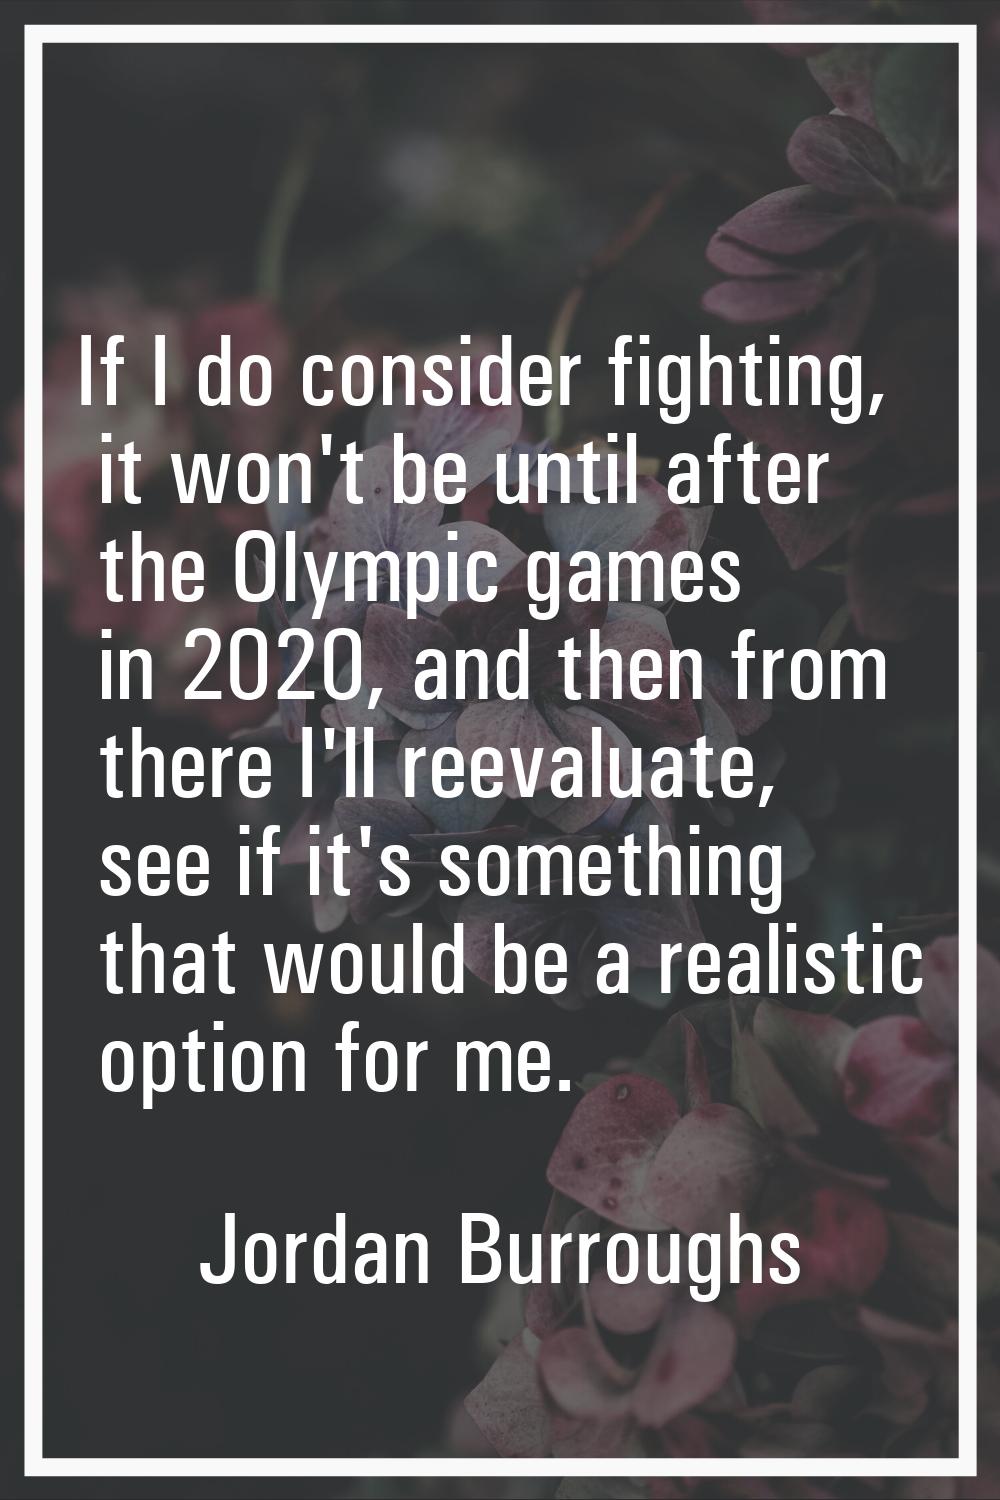 If I do consider fighting, it won't be until after the Olympic games in 2020, and then from there I